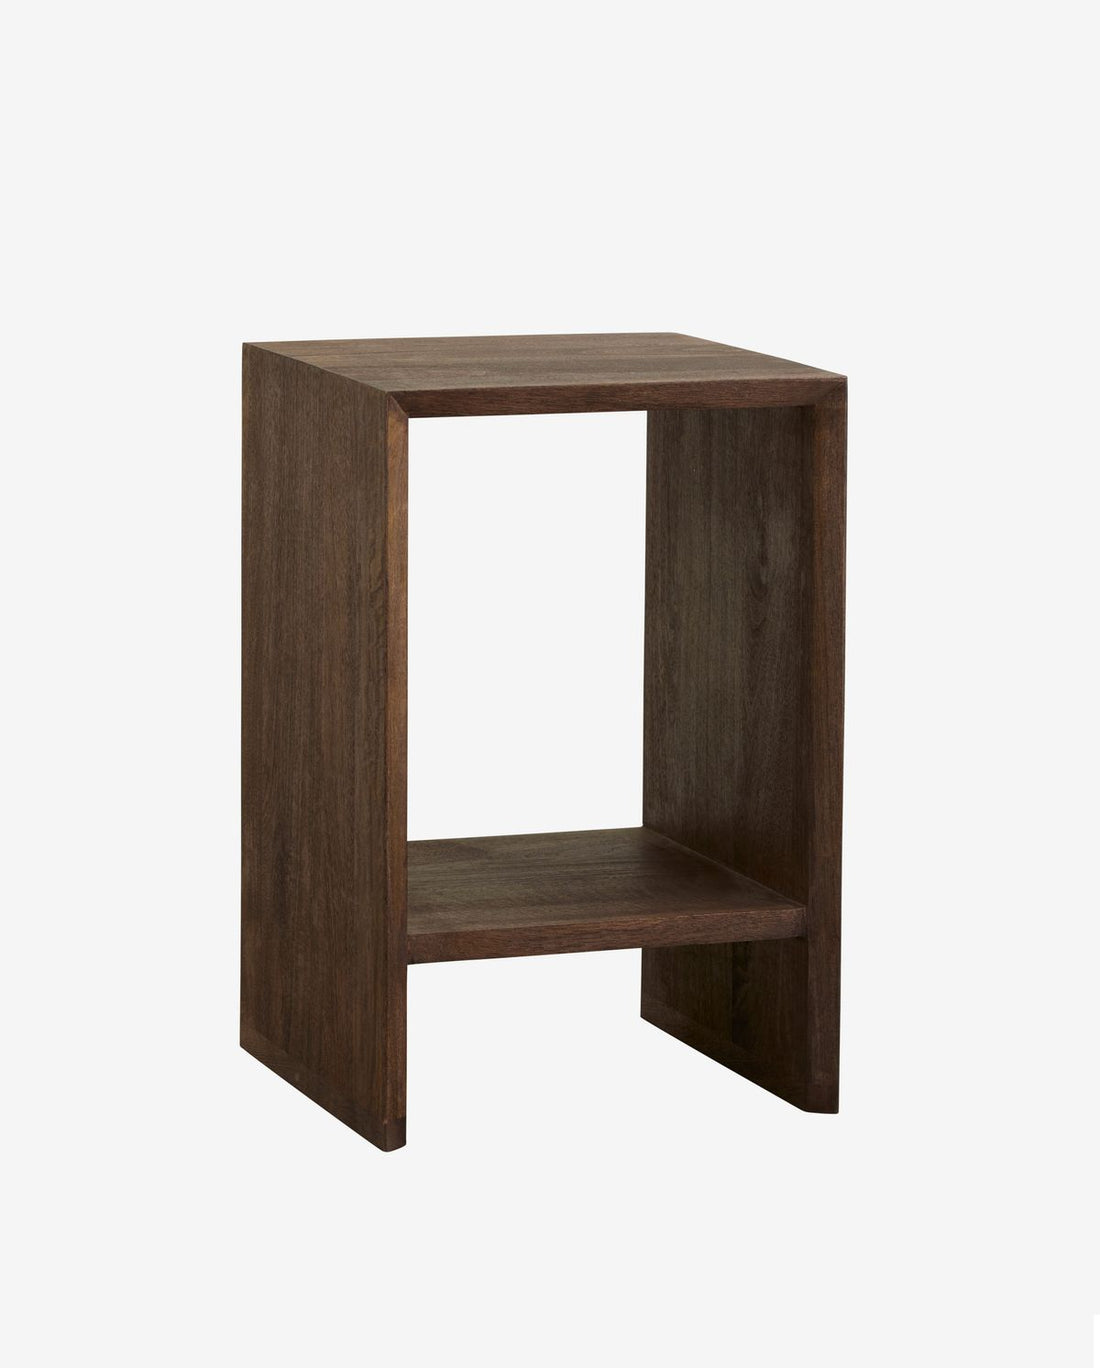 Nordal A/S NAPO NightStand/Tabela lateral - Marrom escuro